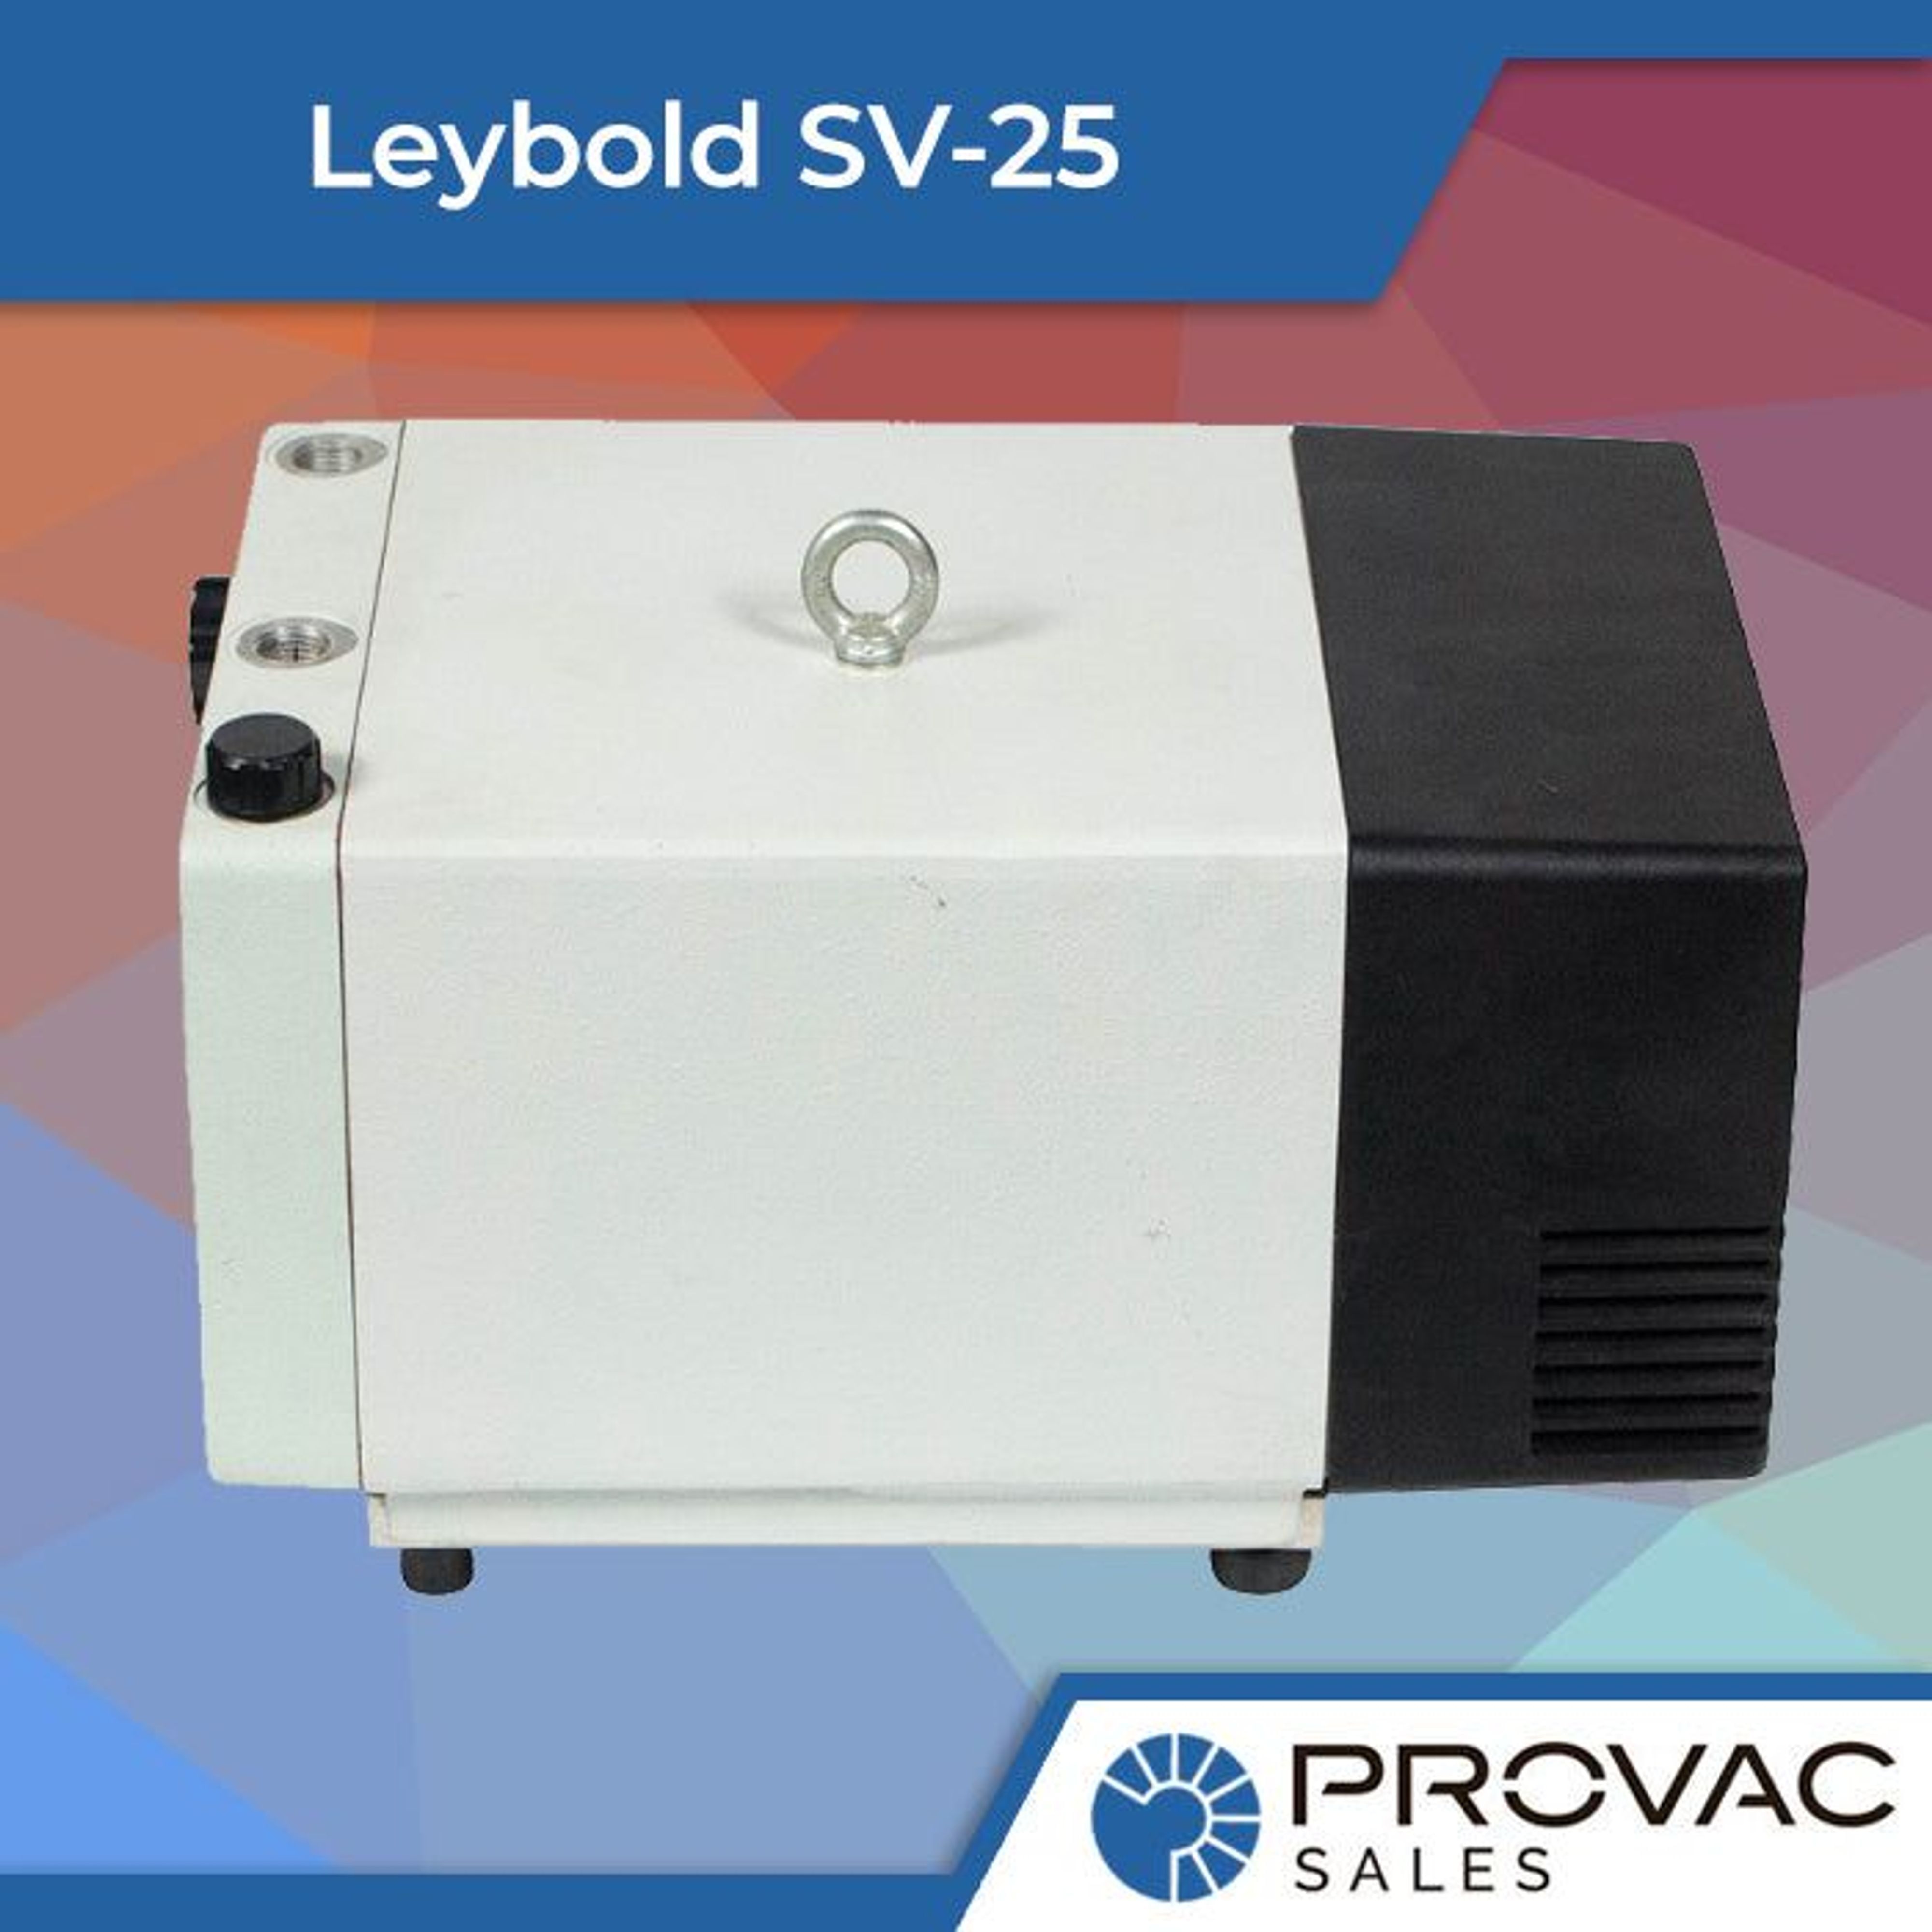 Leybold SV-25 Vane Pump, In Stock Ready To Ship! Background